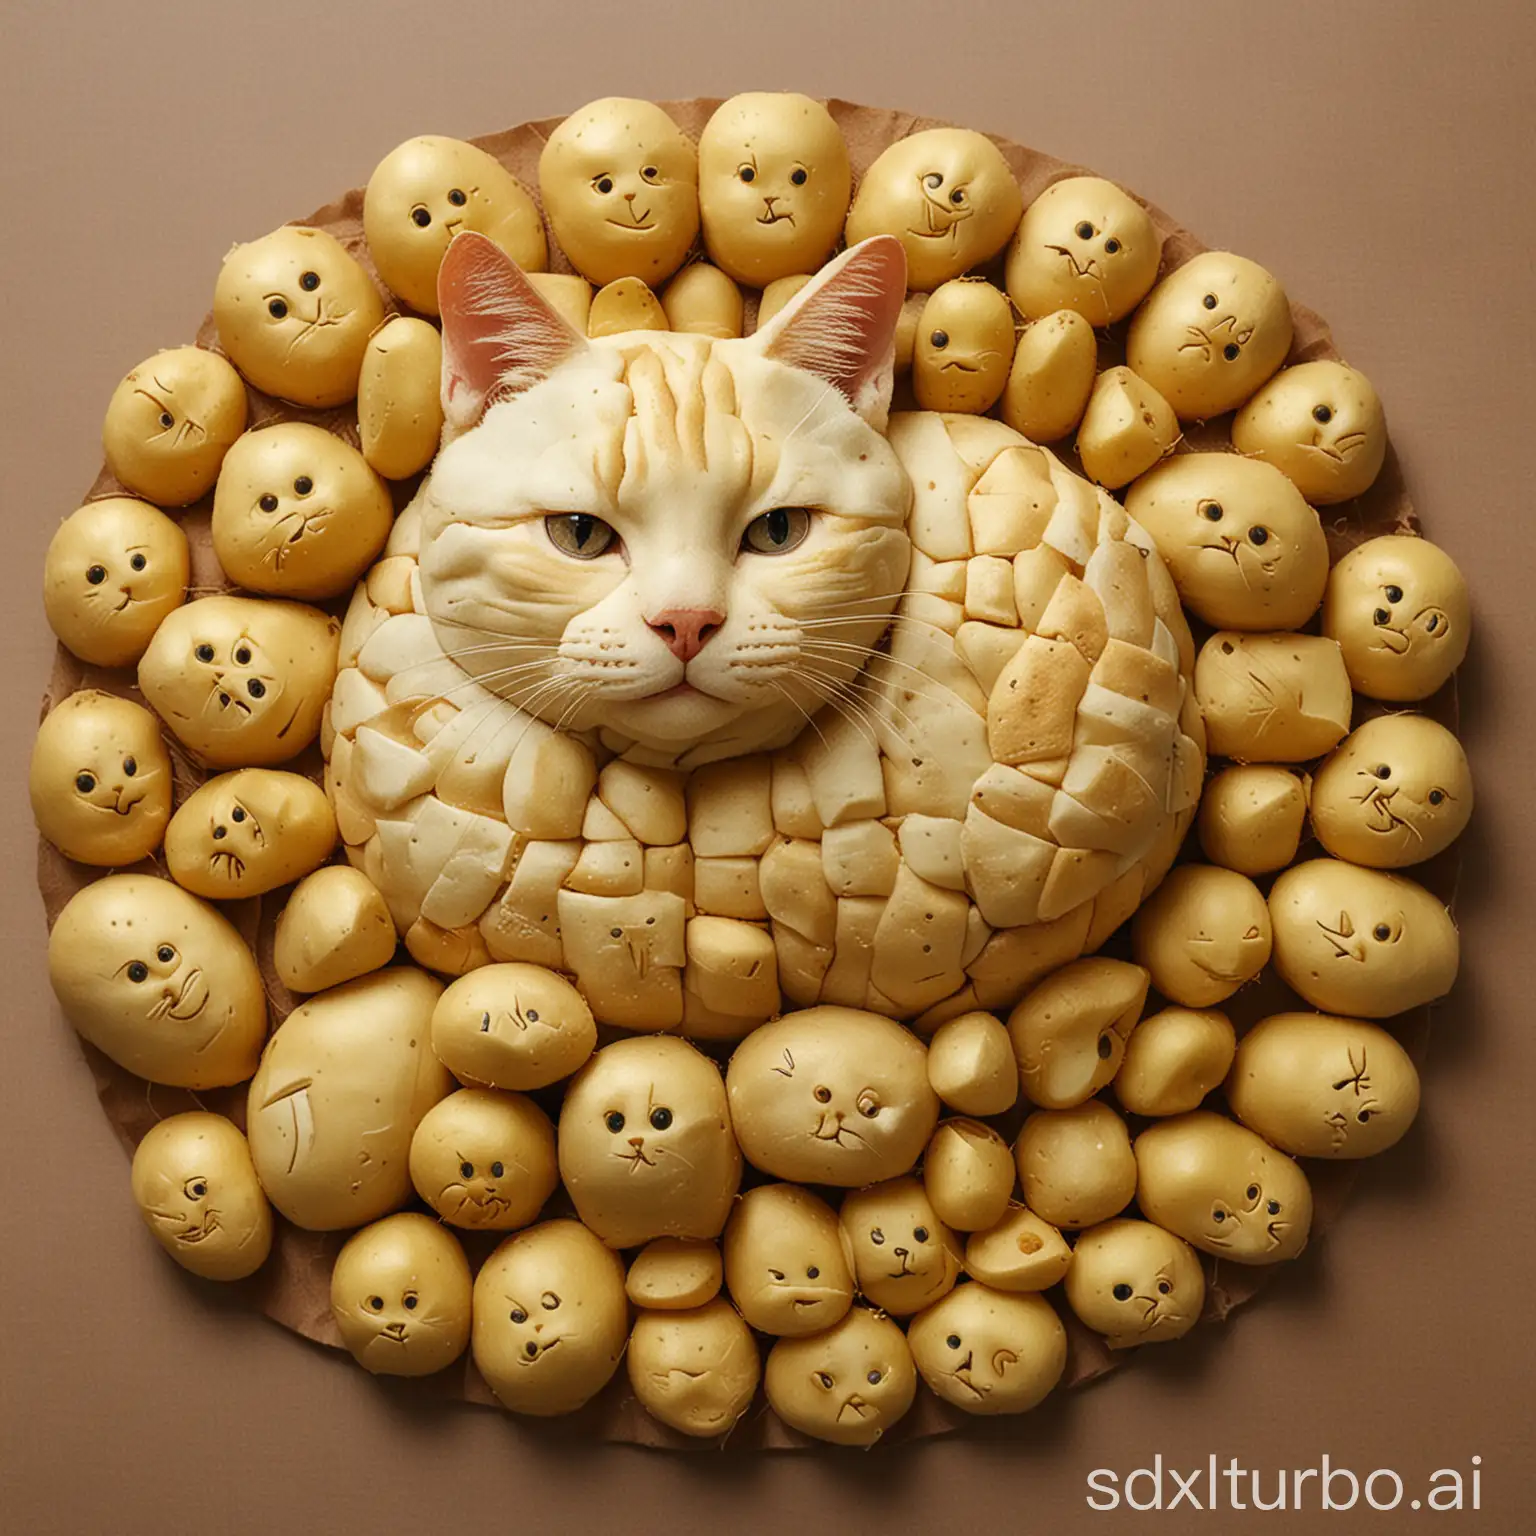 A cat made out of potatoes